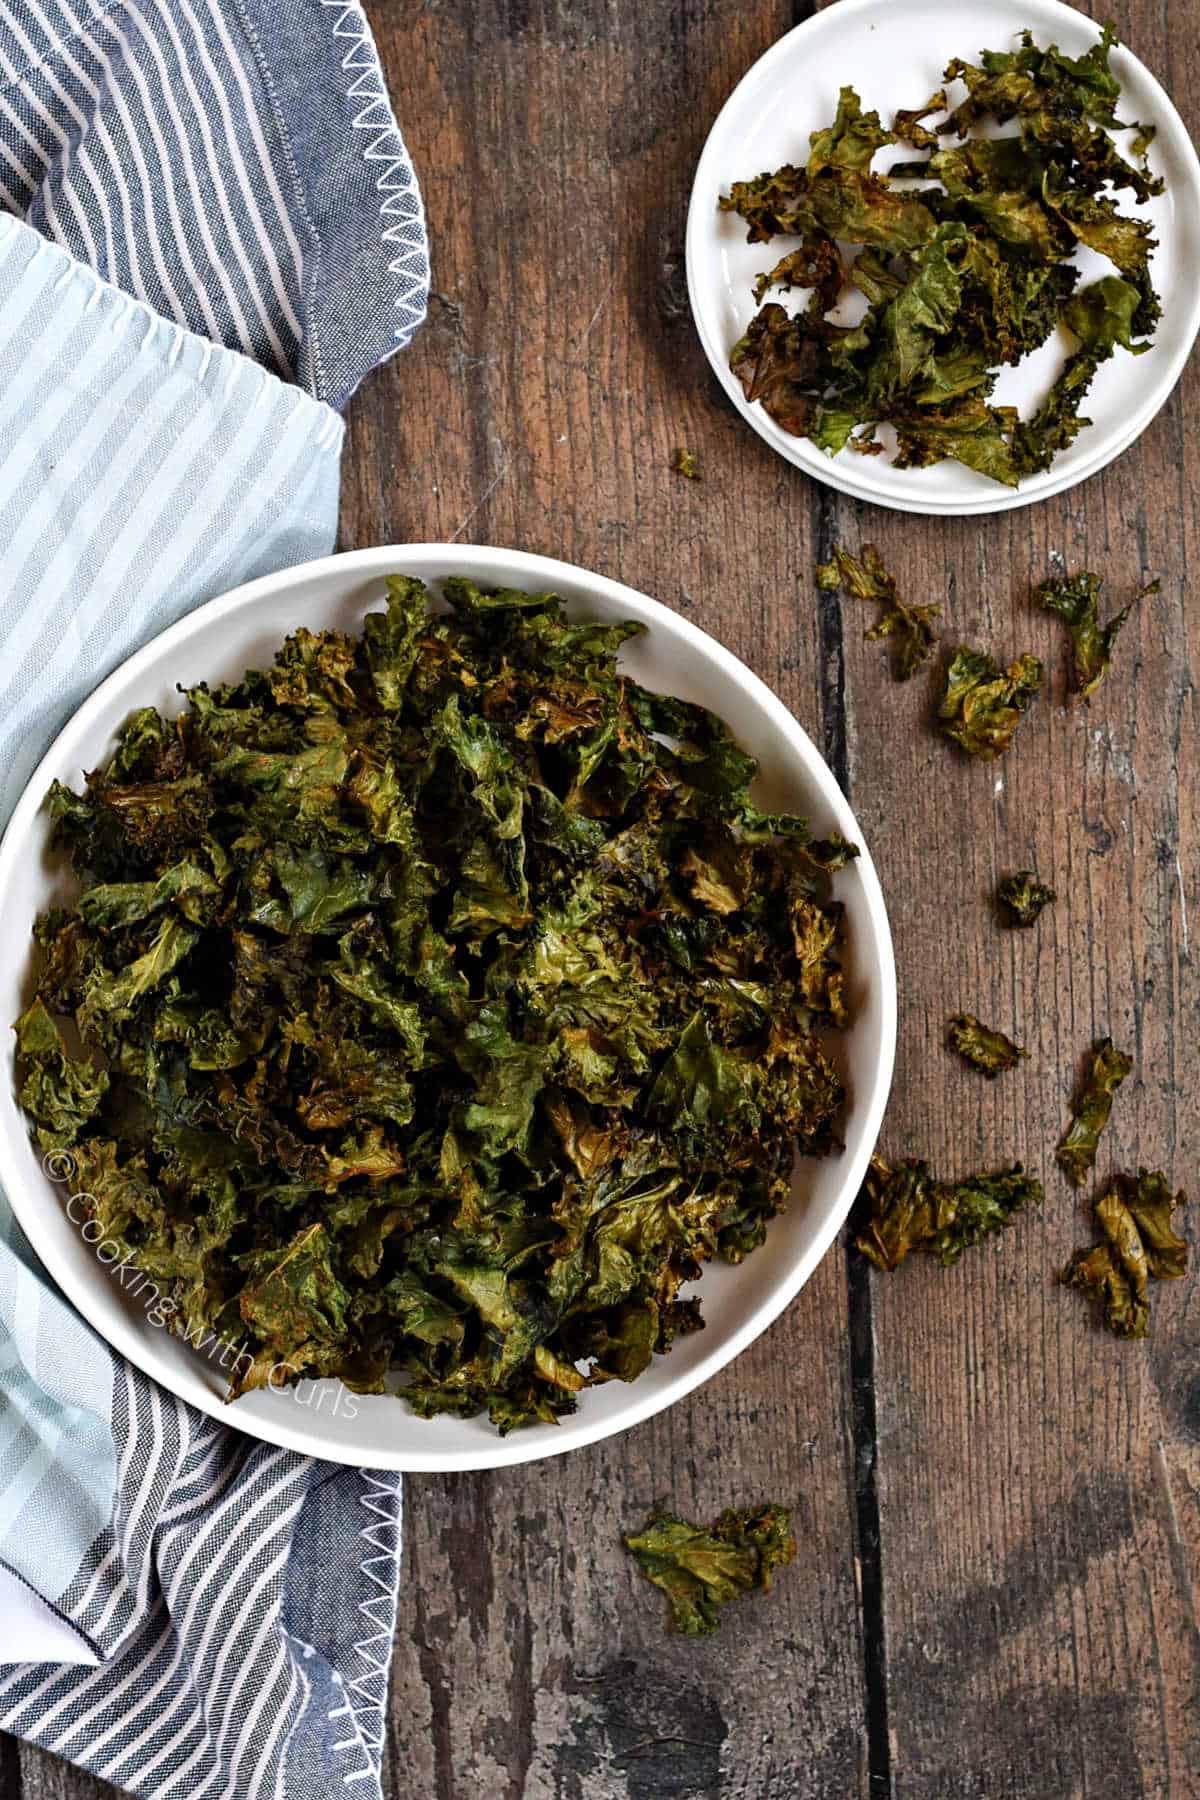 Looking down on a bowl of crispy kale chips with scattered chips on the table leading to a small plate.